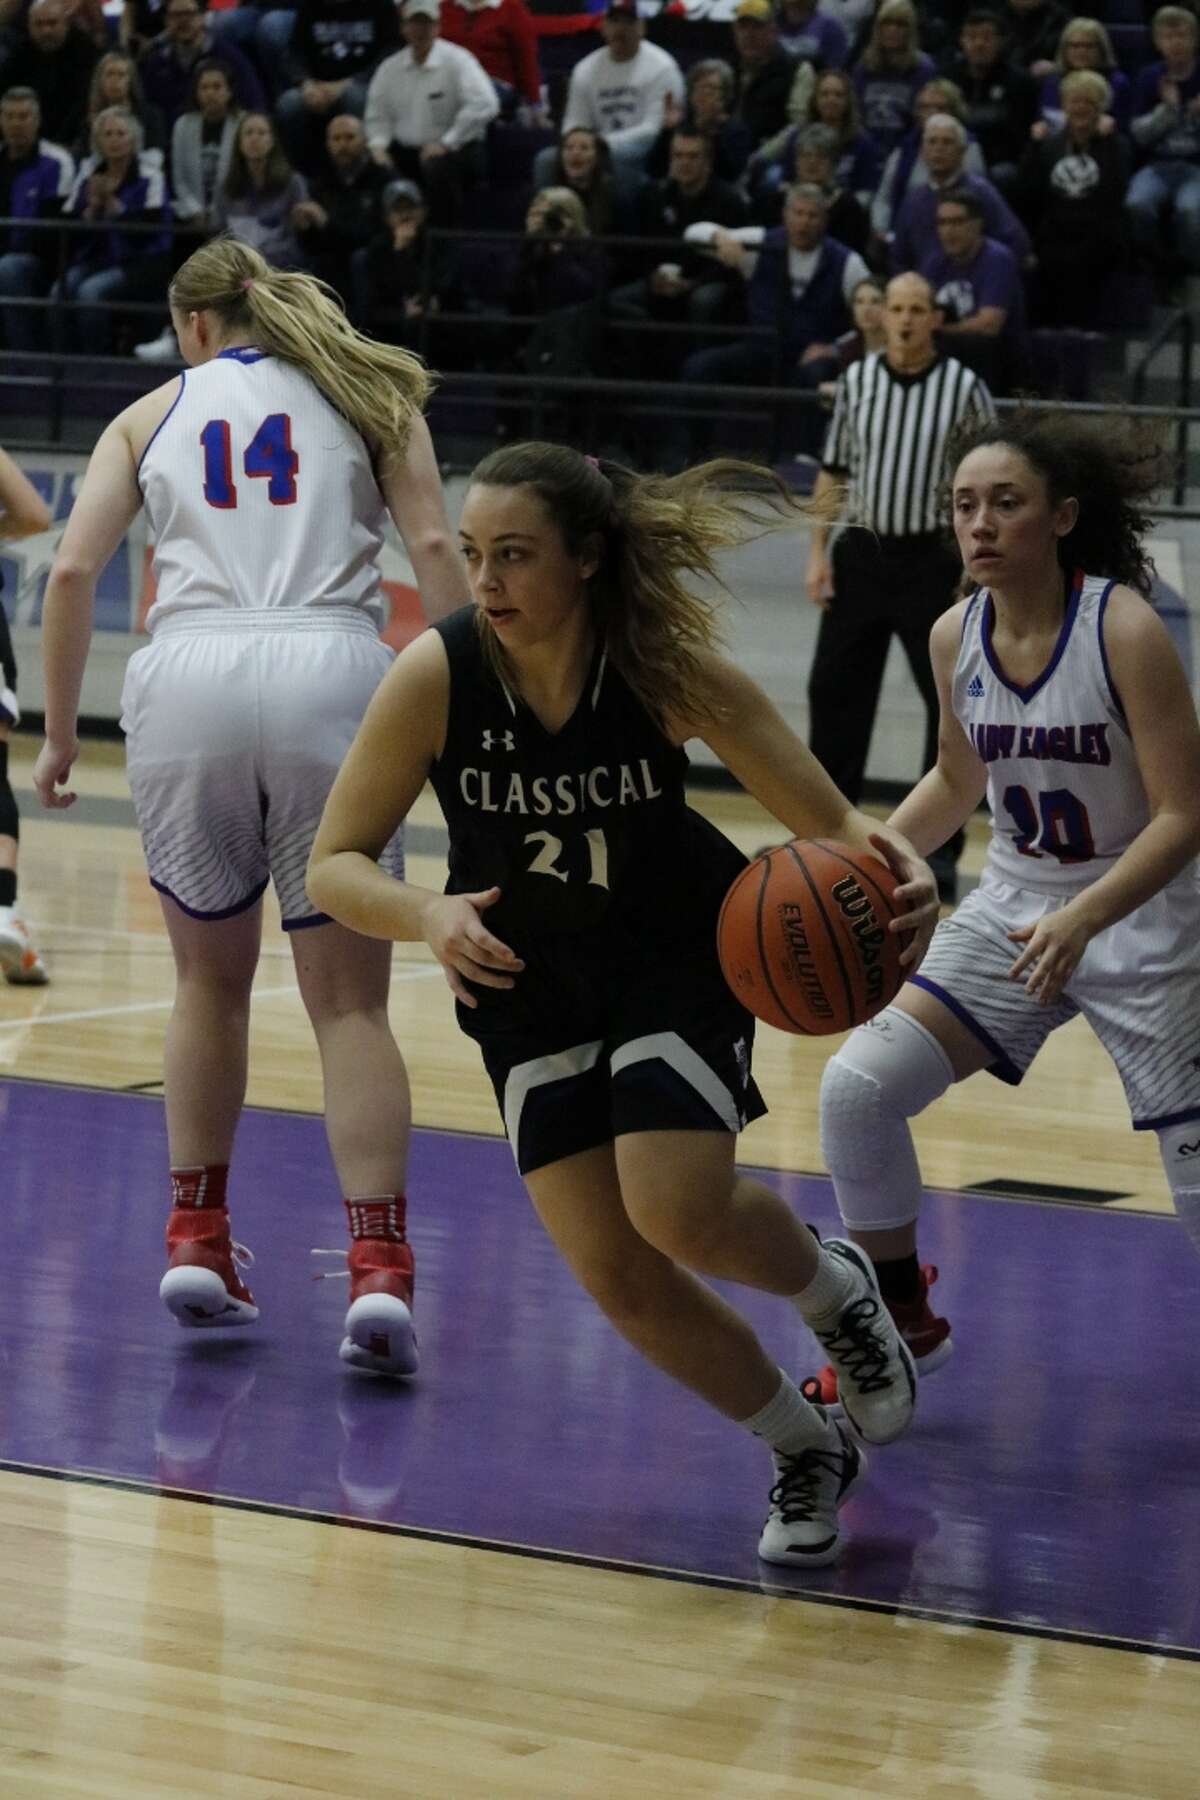 Midland Classical Academy (24-5) cruised to a 66-38 victory over Fort Worth Lake Country (26-16) in the TAPPS 3A state semifinal contest Friday morning at University High School.